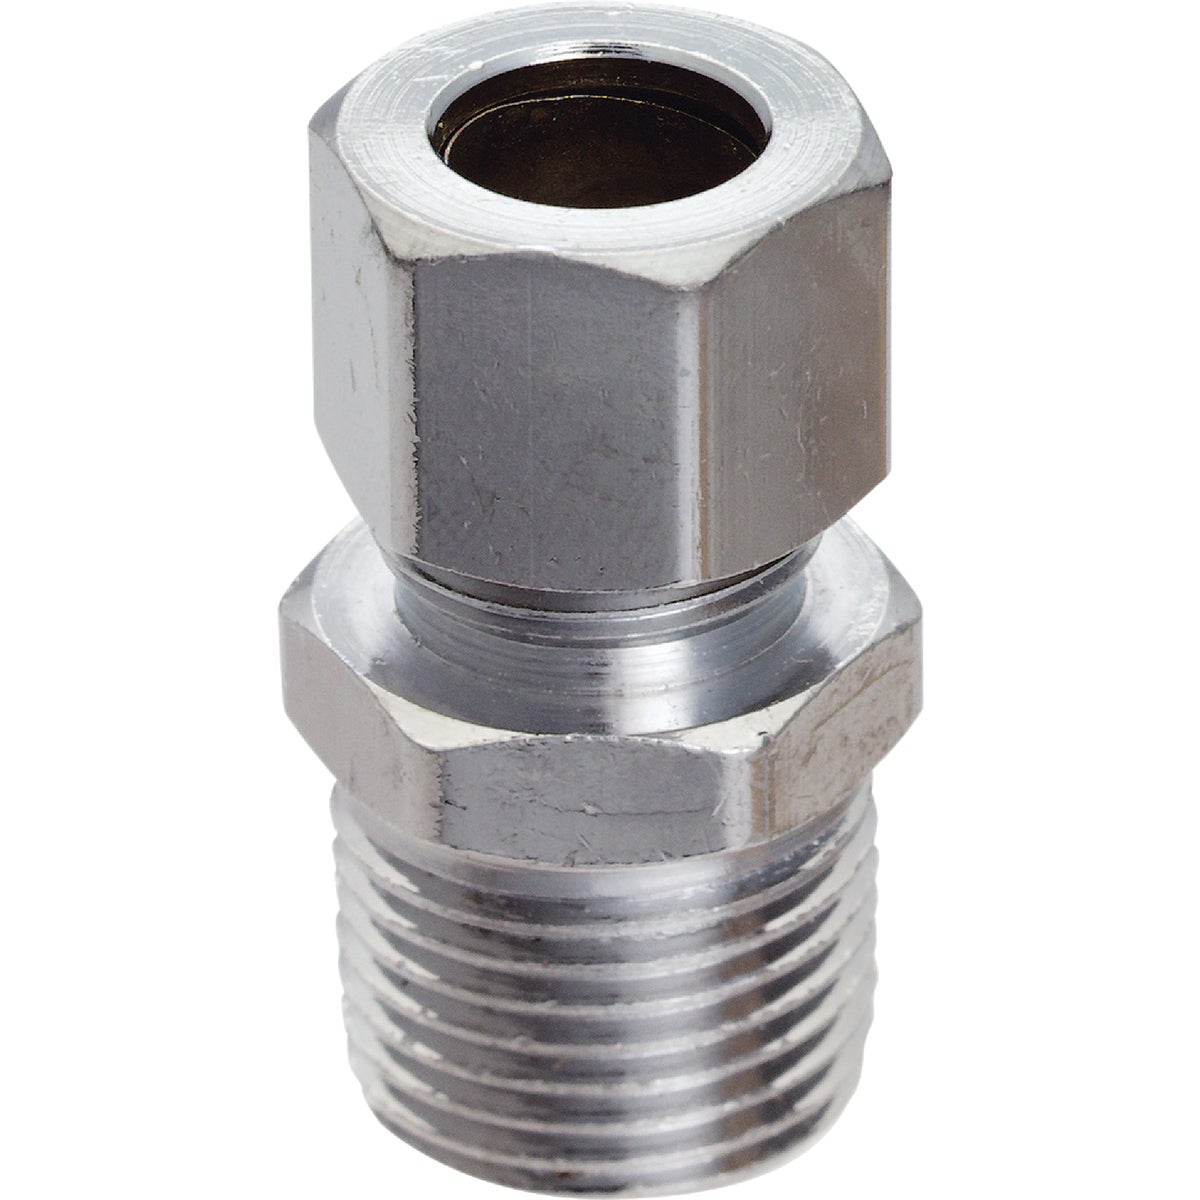 Item 455929, Straight connector Male fitting. Manufactured to include no more than 0.